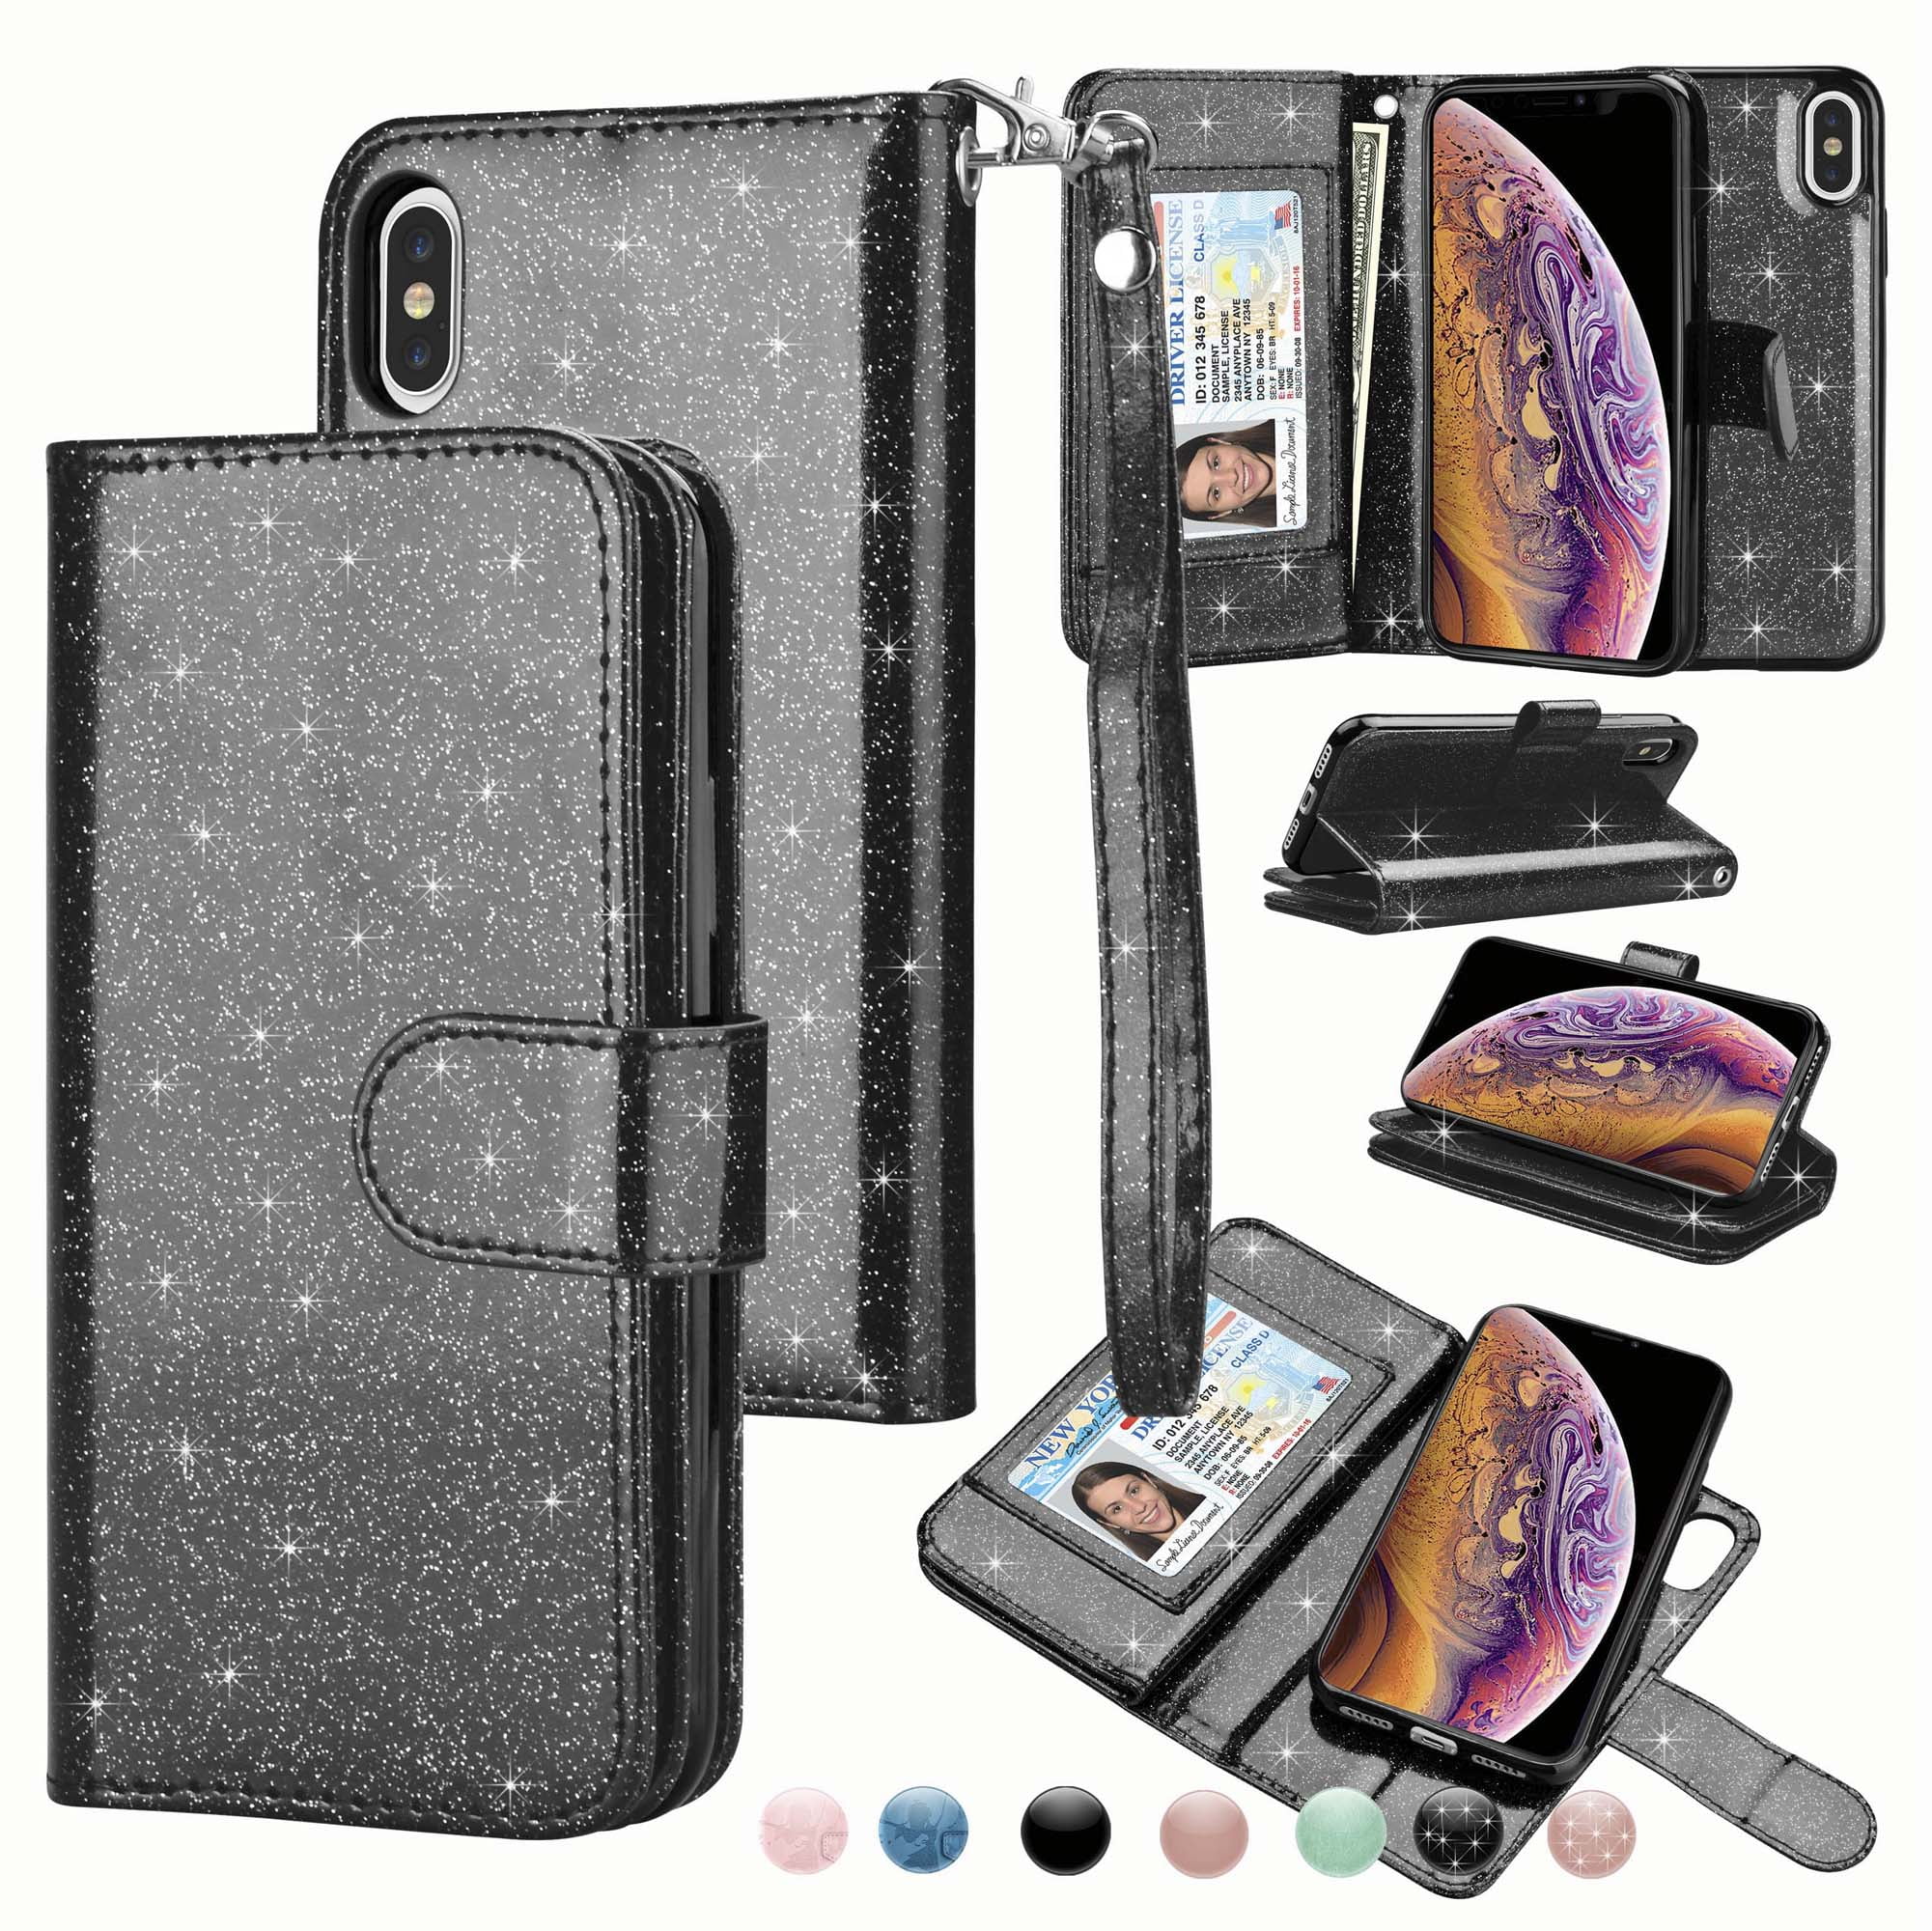 Cover for iPhone Xs Leather Wallet case Kickstand Card Holders Extra-Durable Business with Free Waterproof-Bag iPhone Xs Flip Case